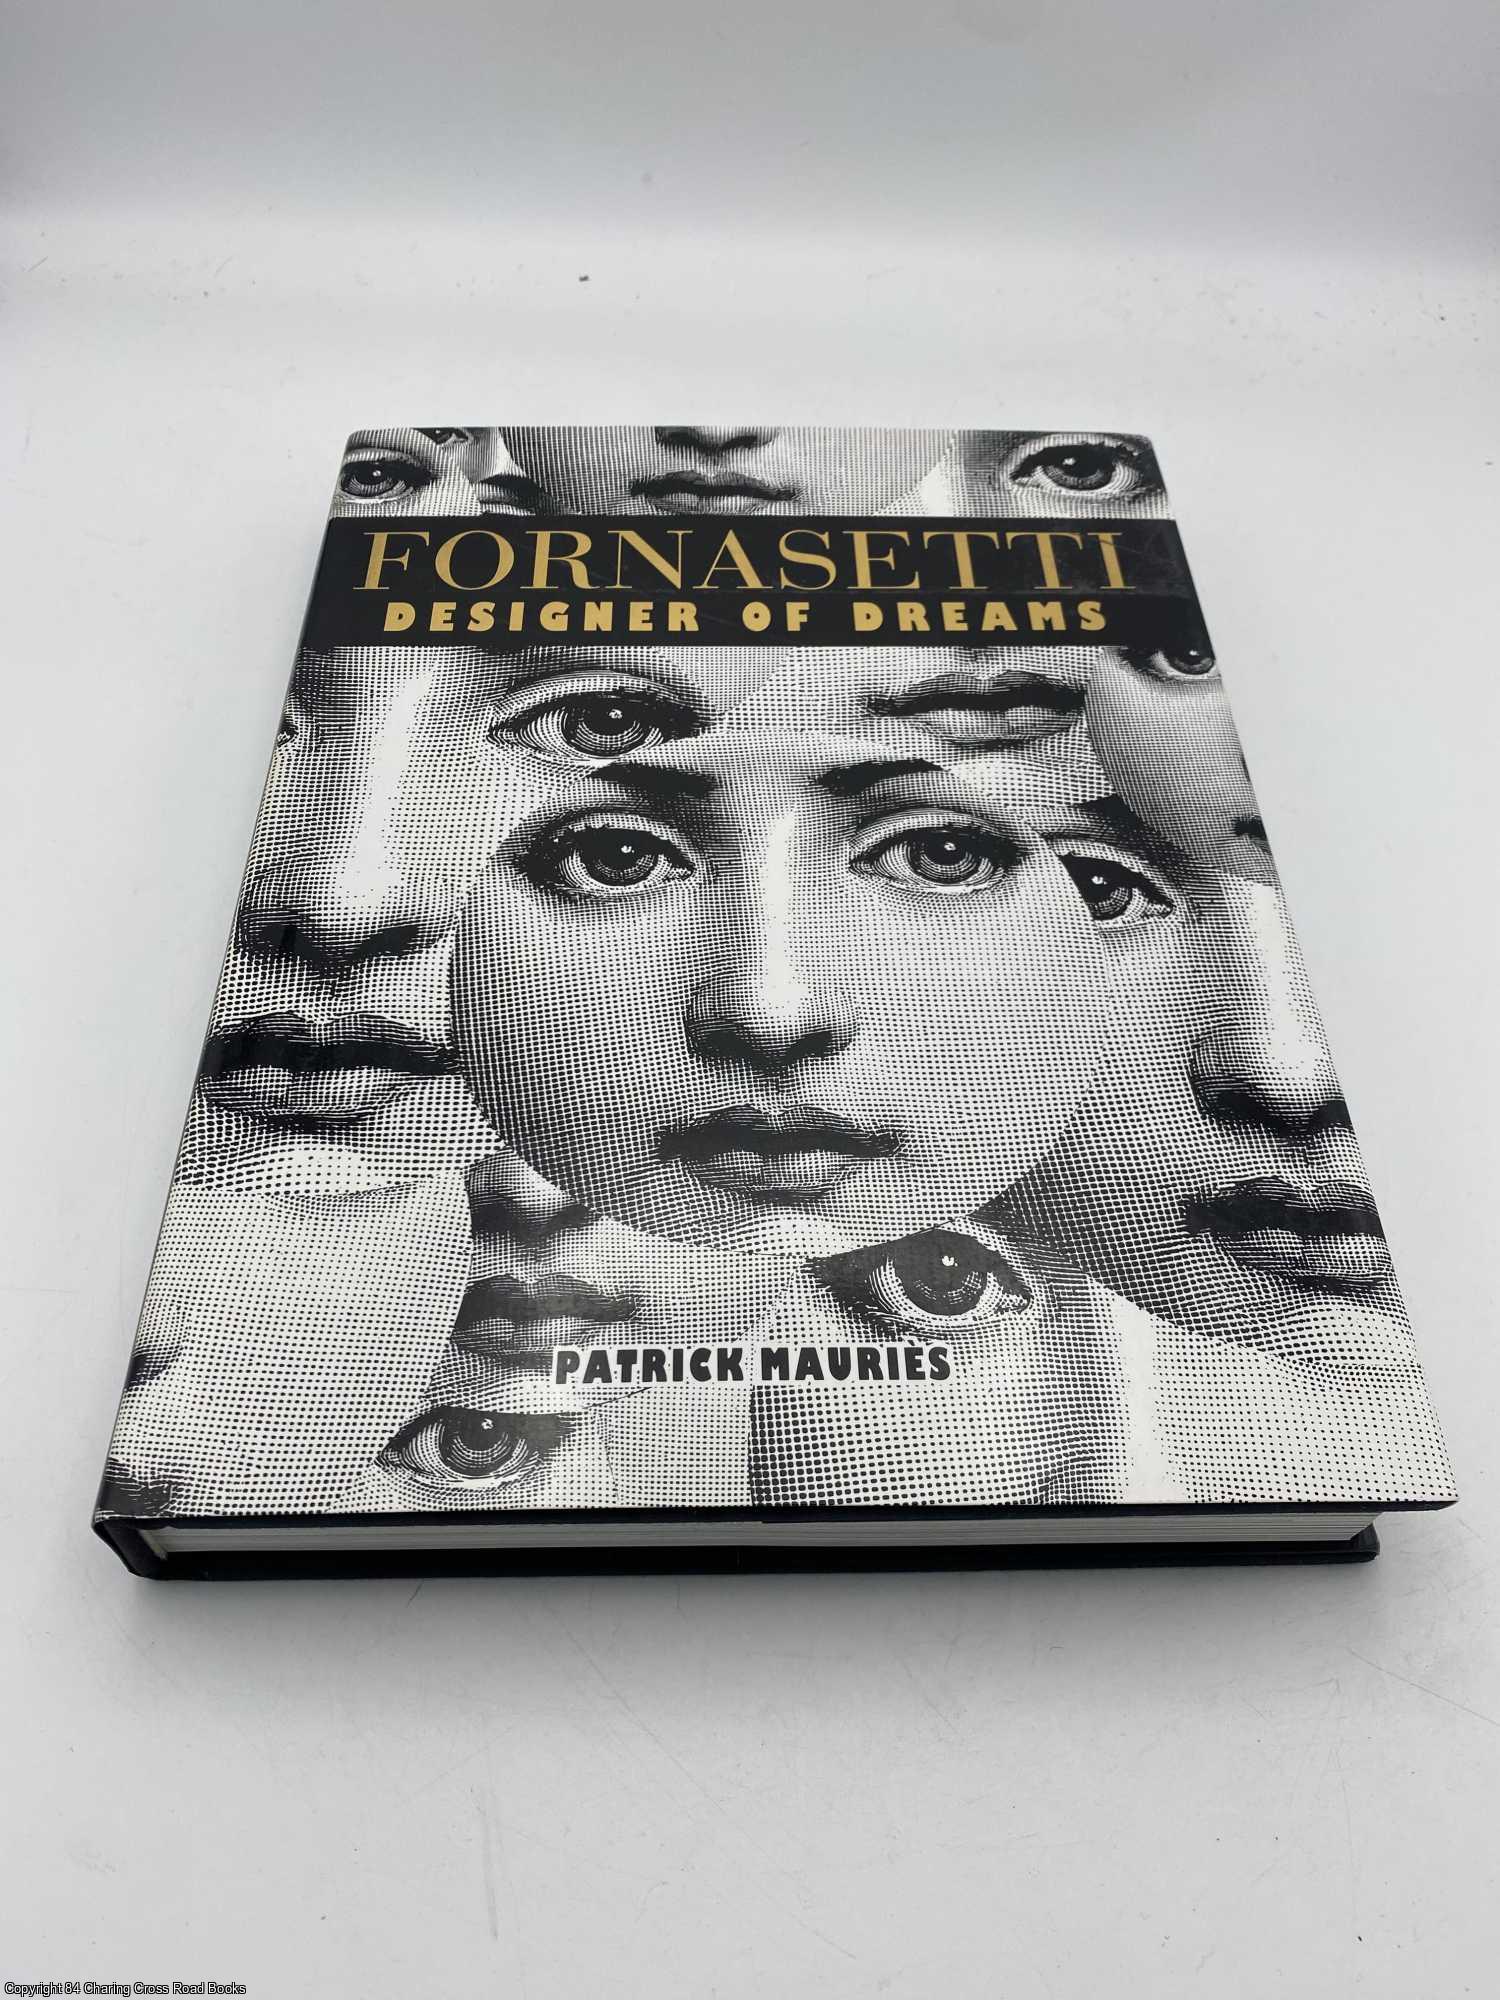 Fornasetti Designer of Dreams | Patrick Mauries | First Edition